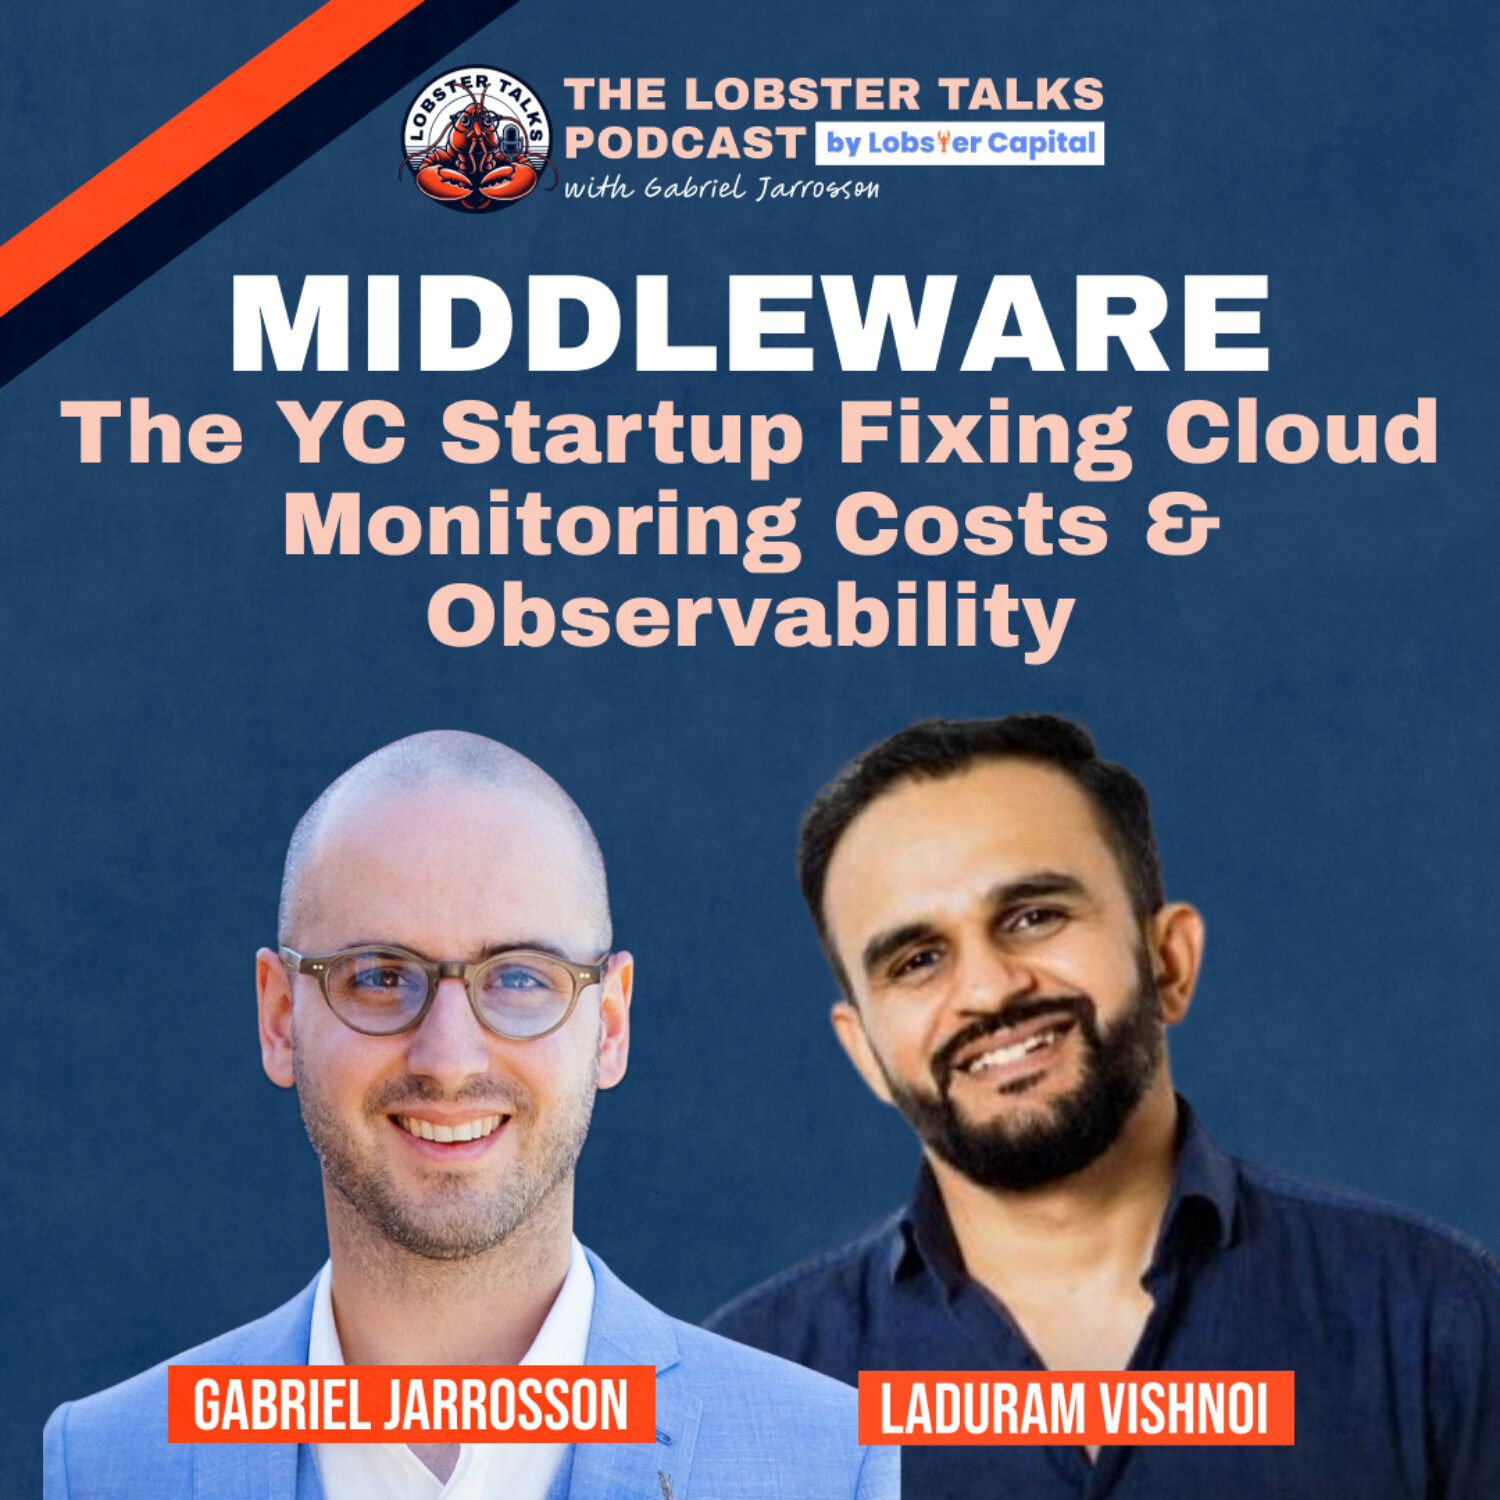 Middleware: The YC Startup Slashing Cloud Monitoring Costs & Observability | Episode 5